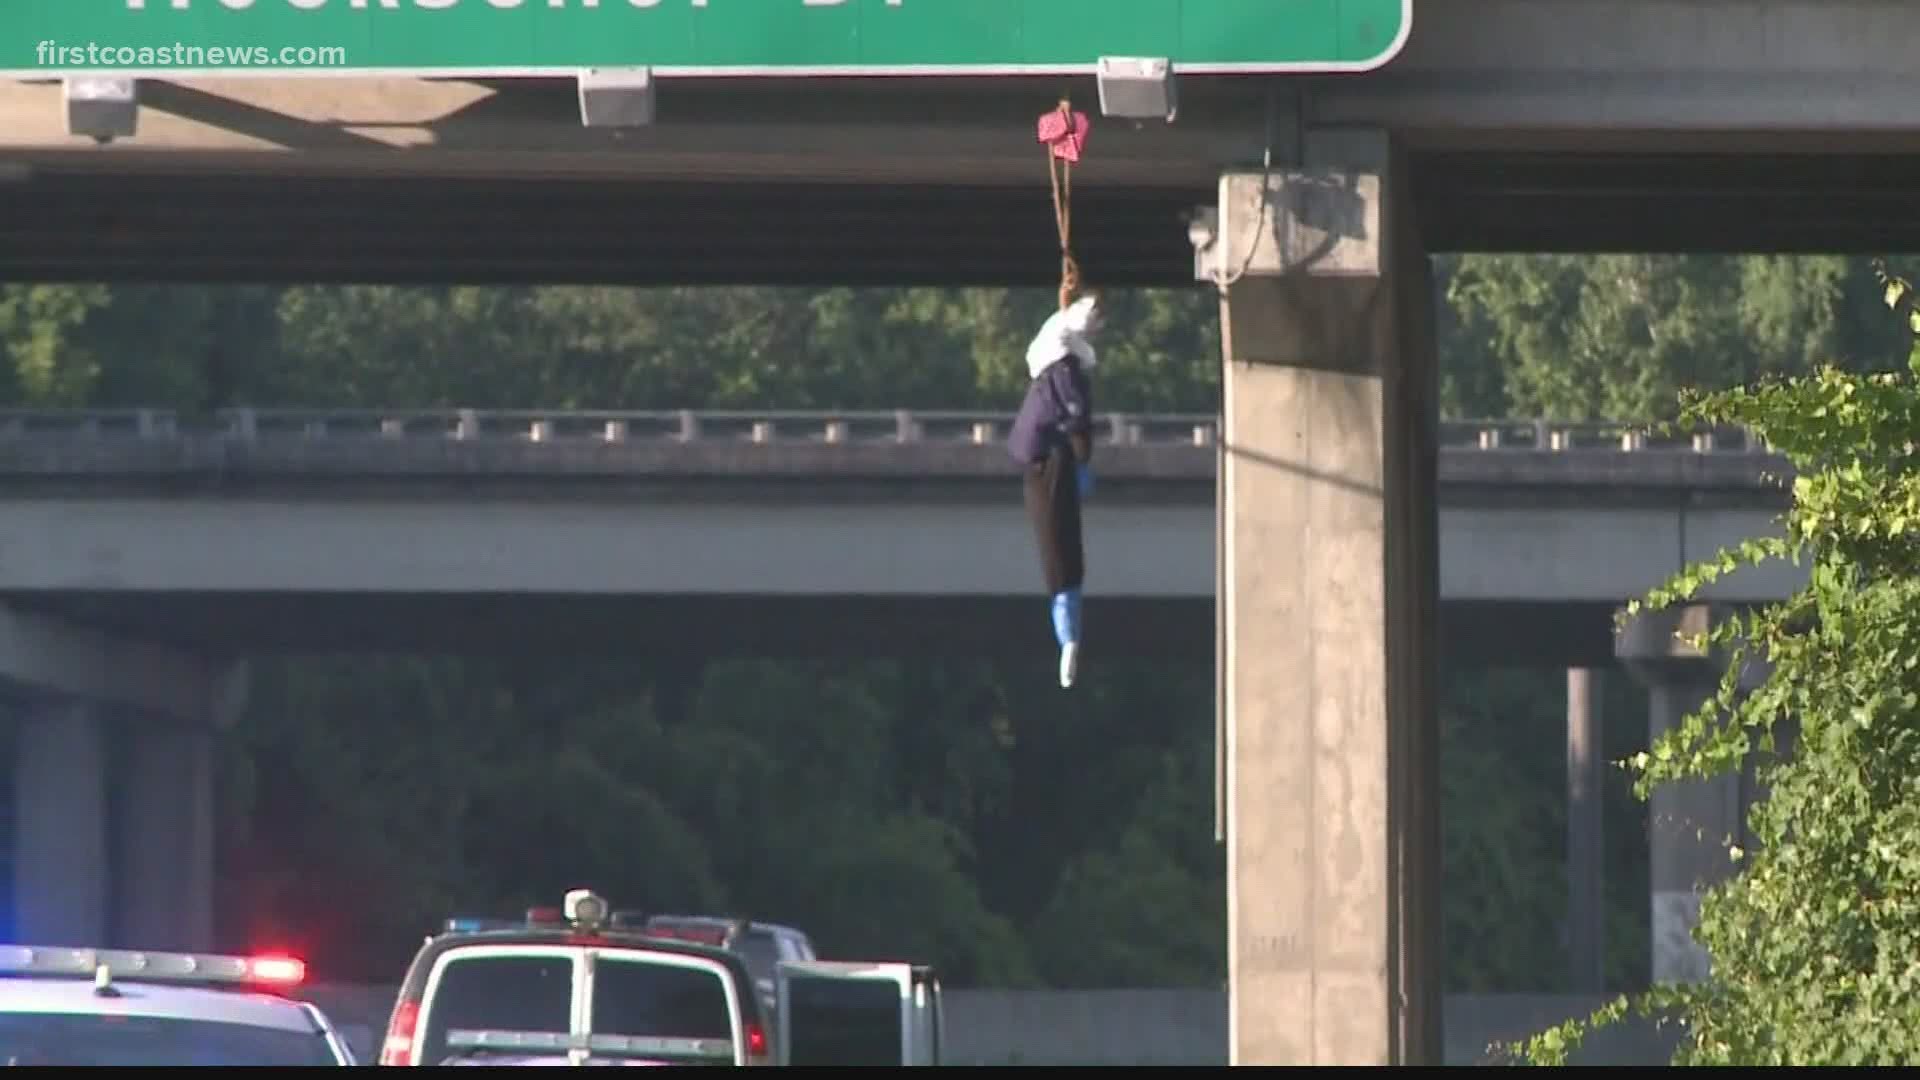 The Jacksonville Sheriff's Office is investigating Saturday after a mannequin was found hanging from the Interstate-95 overpass near the Zoo Parkway exit.